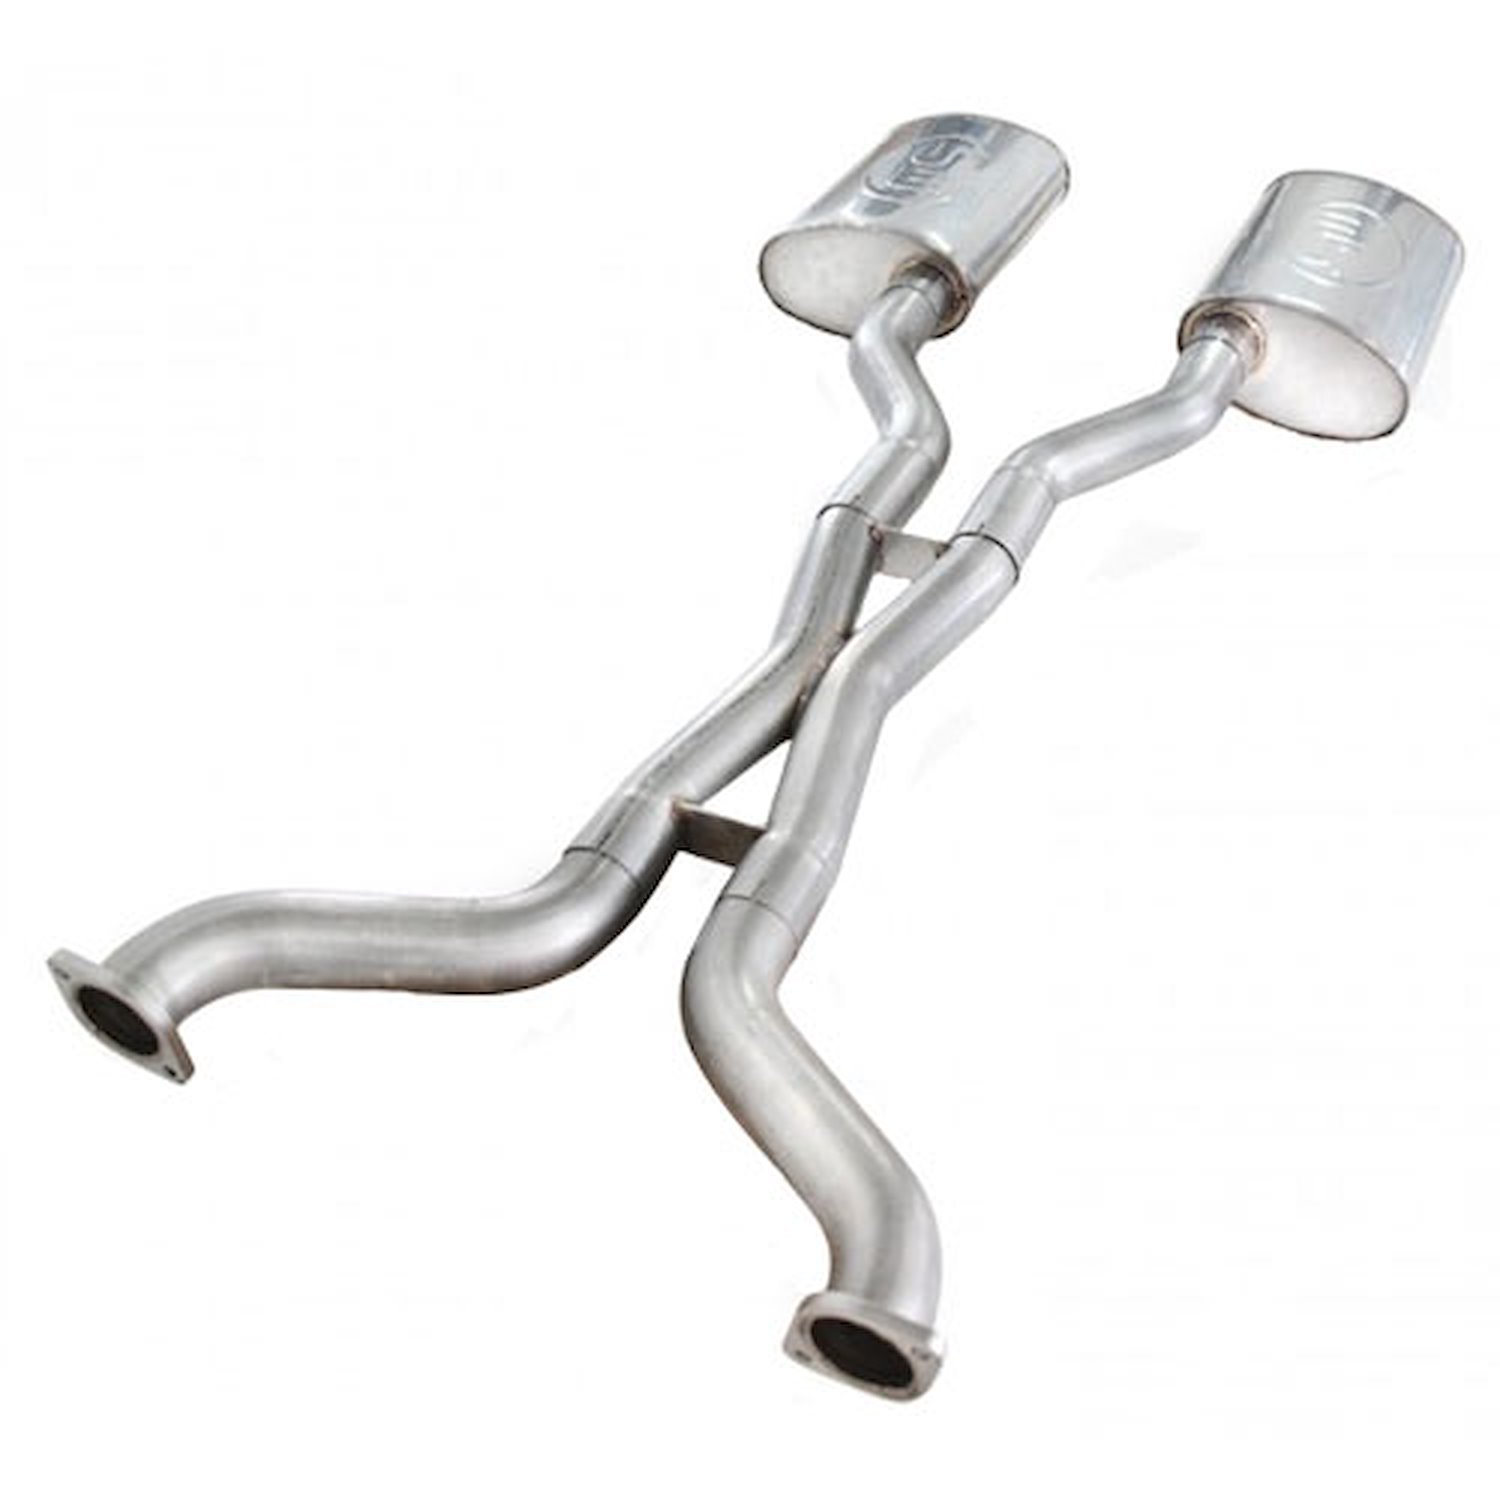 2003-11 Crown Victoria Grand Marquis 4.6L 2V 2.5 Catback Exhaust with dual chambered turbo mufflers